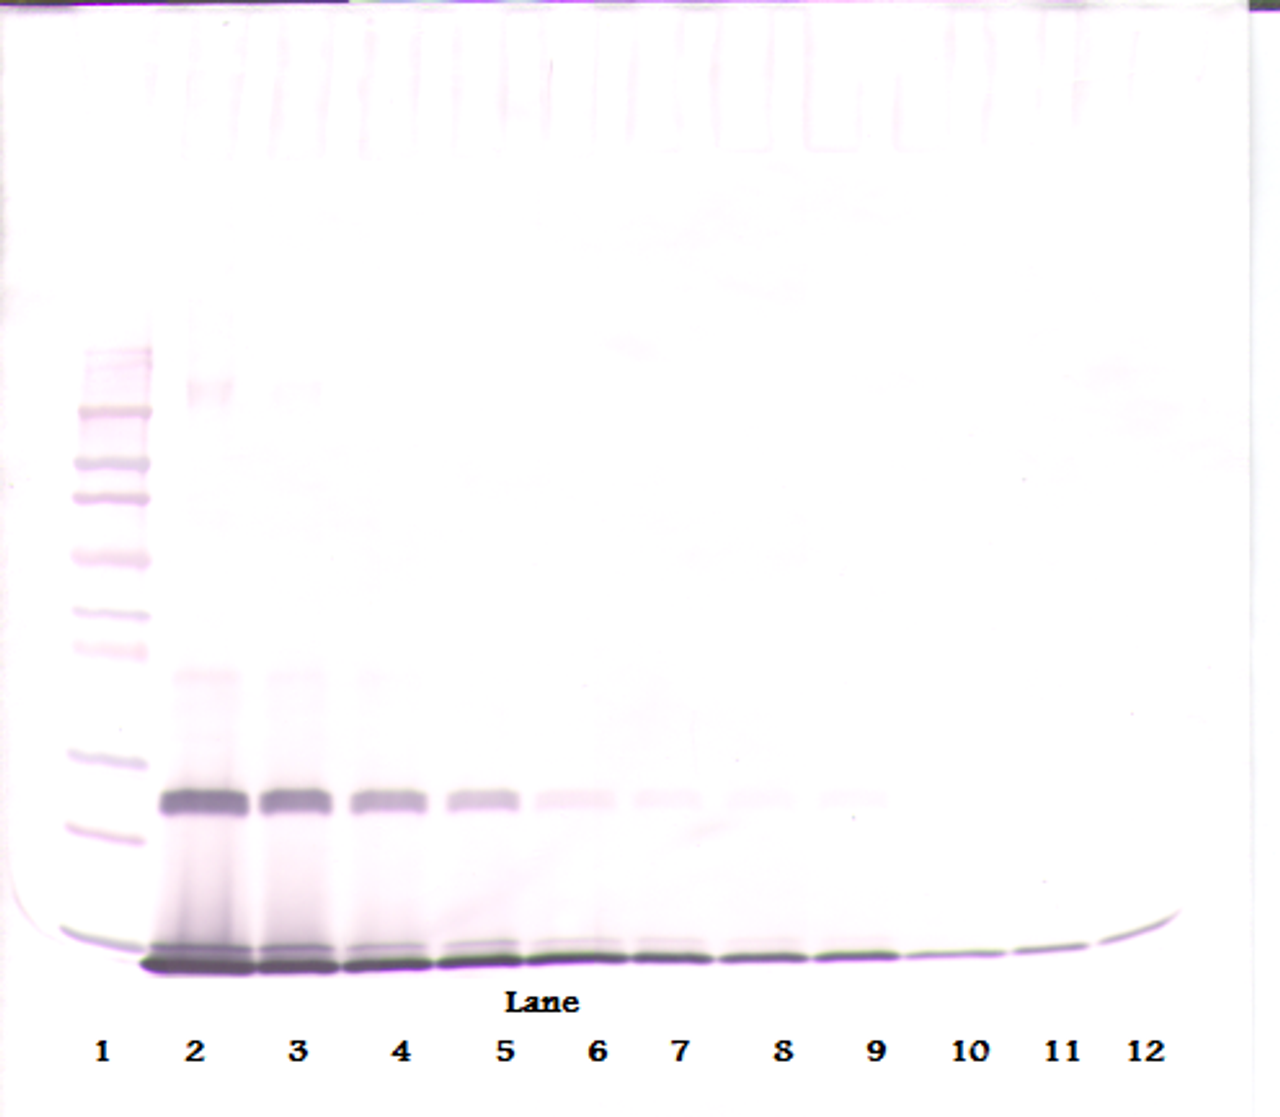 To detect hIL-4 by Western Blot analysis this antibody can be used at a concentration of 0.1 - 0.2 ug/ml. Used in conjunction with compatible secondary reagents the detection limit for recombinant hIL-4 is 1.5 - 3.0 ng/lane, under either reducing or non-reducing conditions.